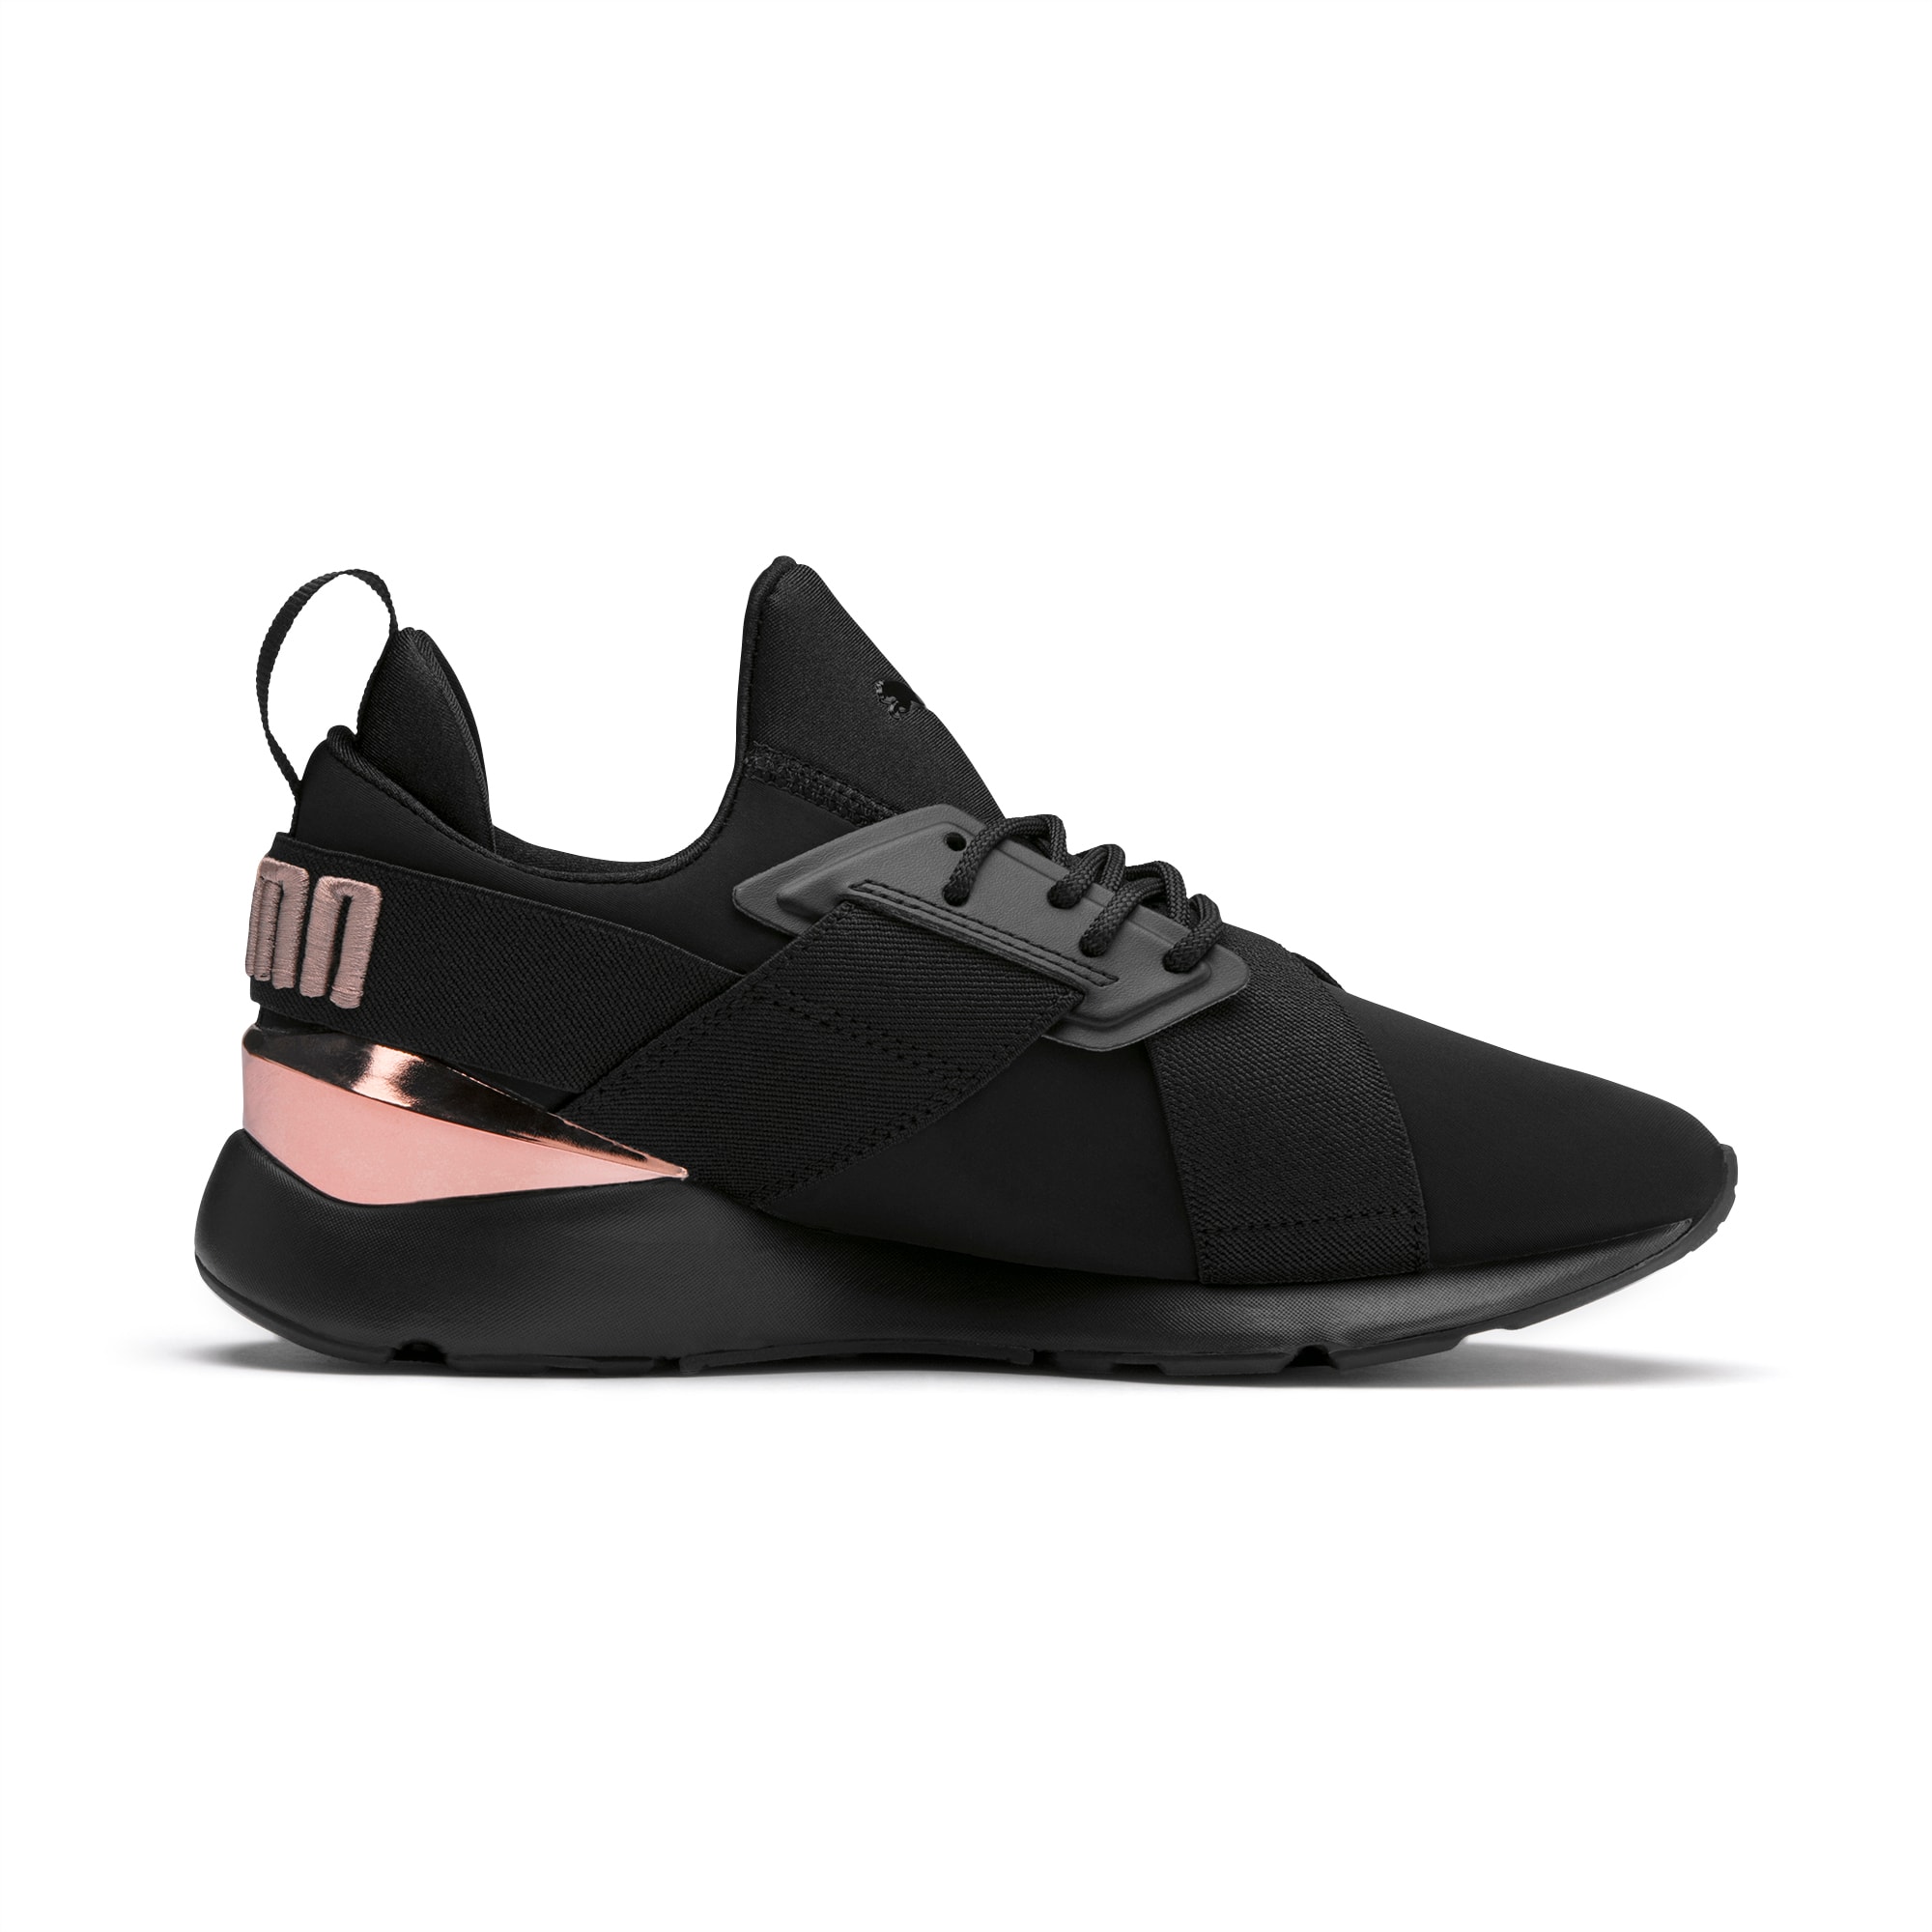 puma shoes black and rose gold